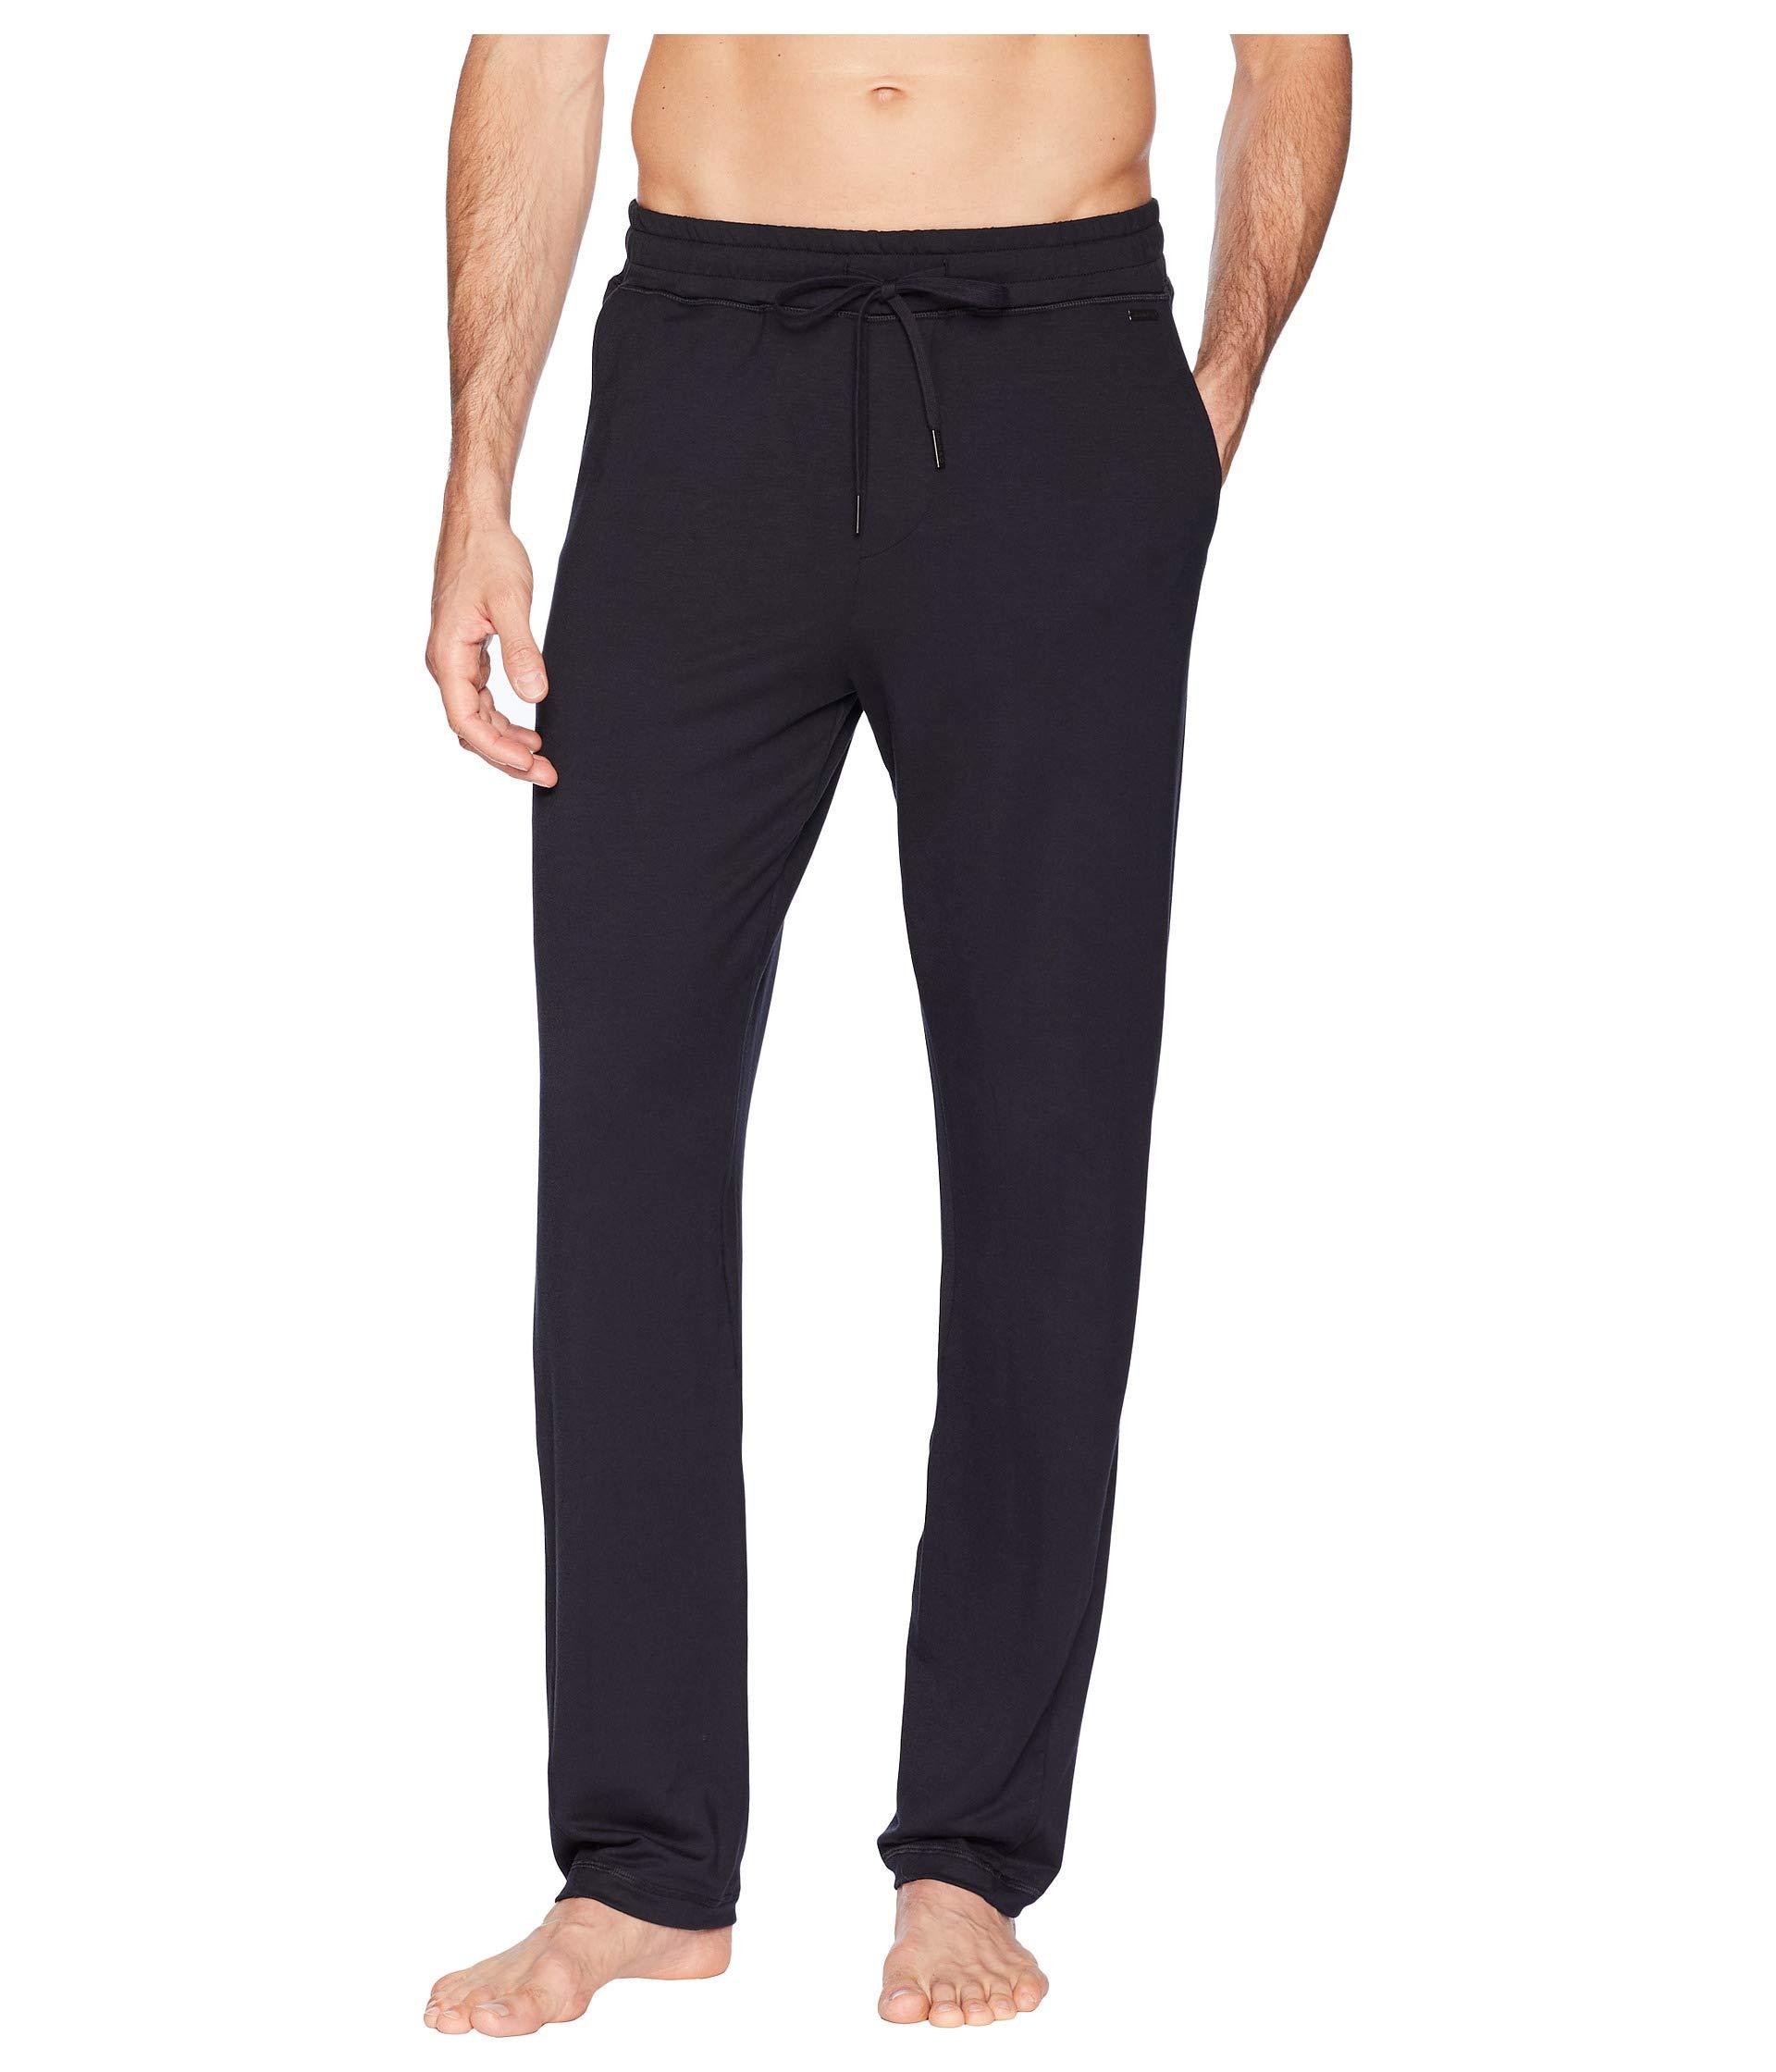 Hanro Synthetic Living Relax Long Pants in Black for Men - Lyst